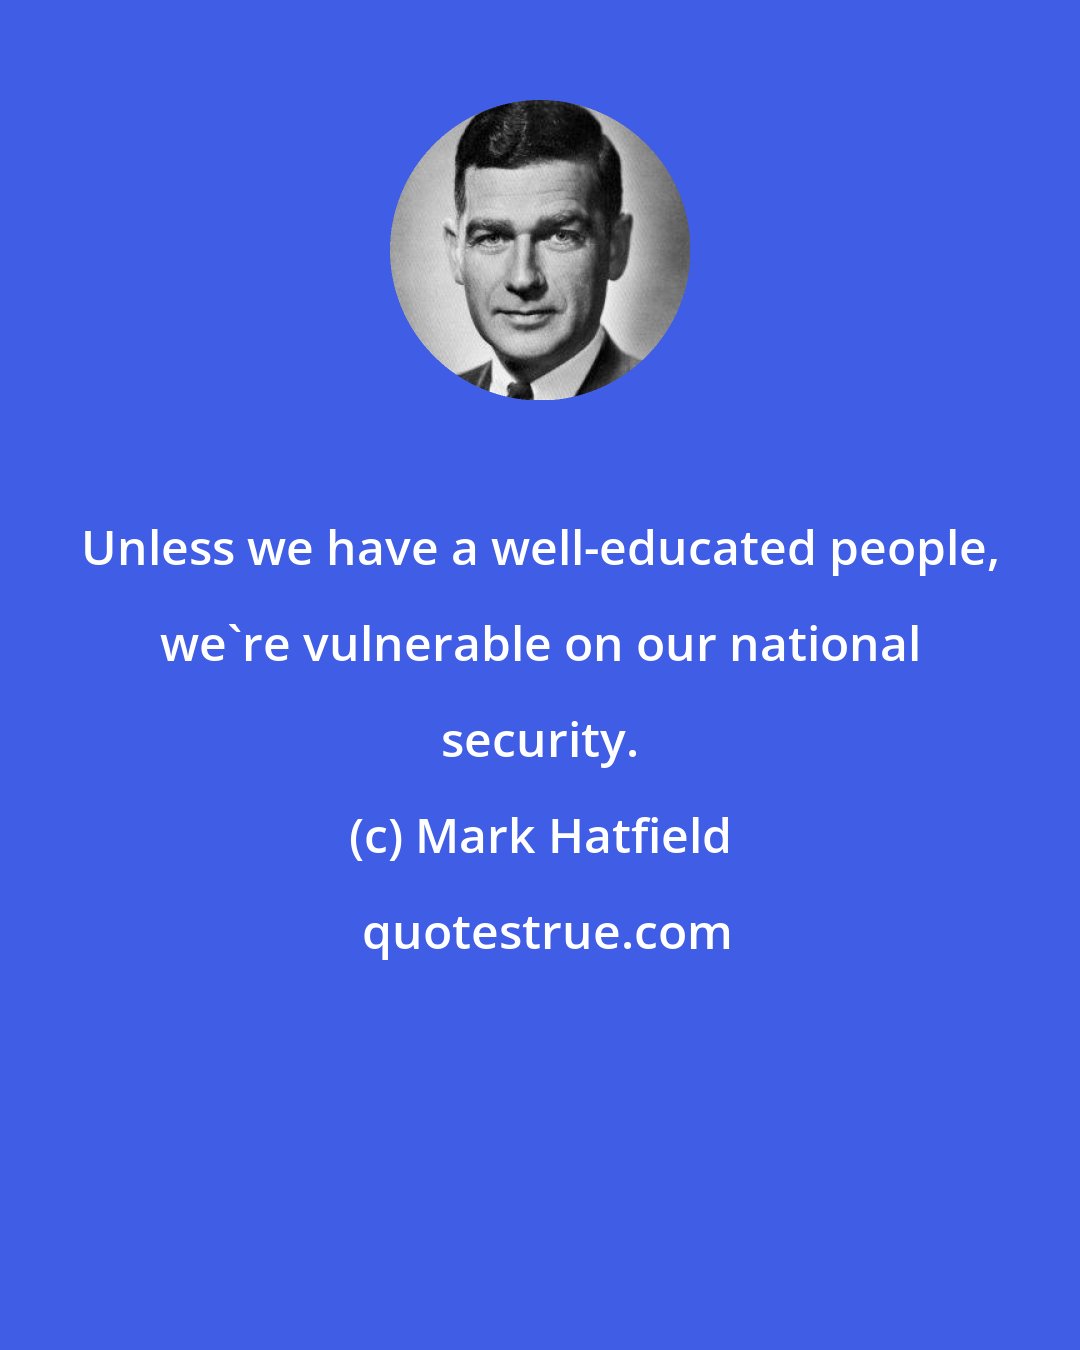 Mark Hatfield: Unless we have a well-educated people, we're vulnerable on our national security.